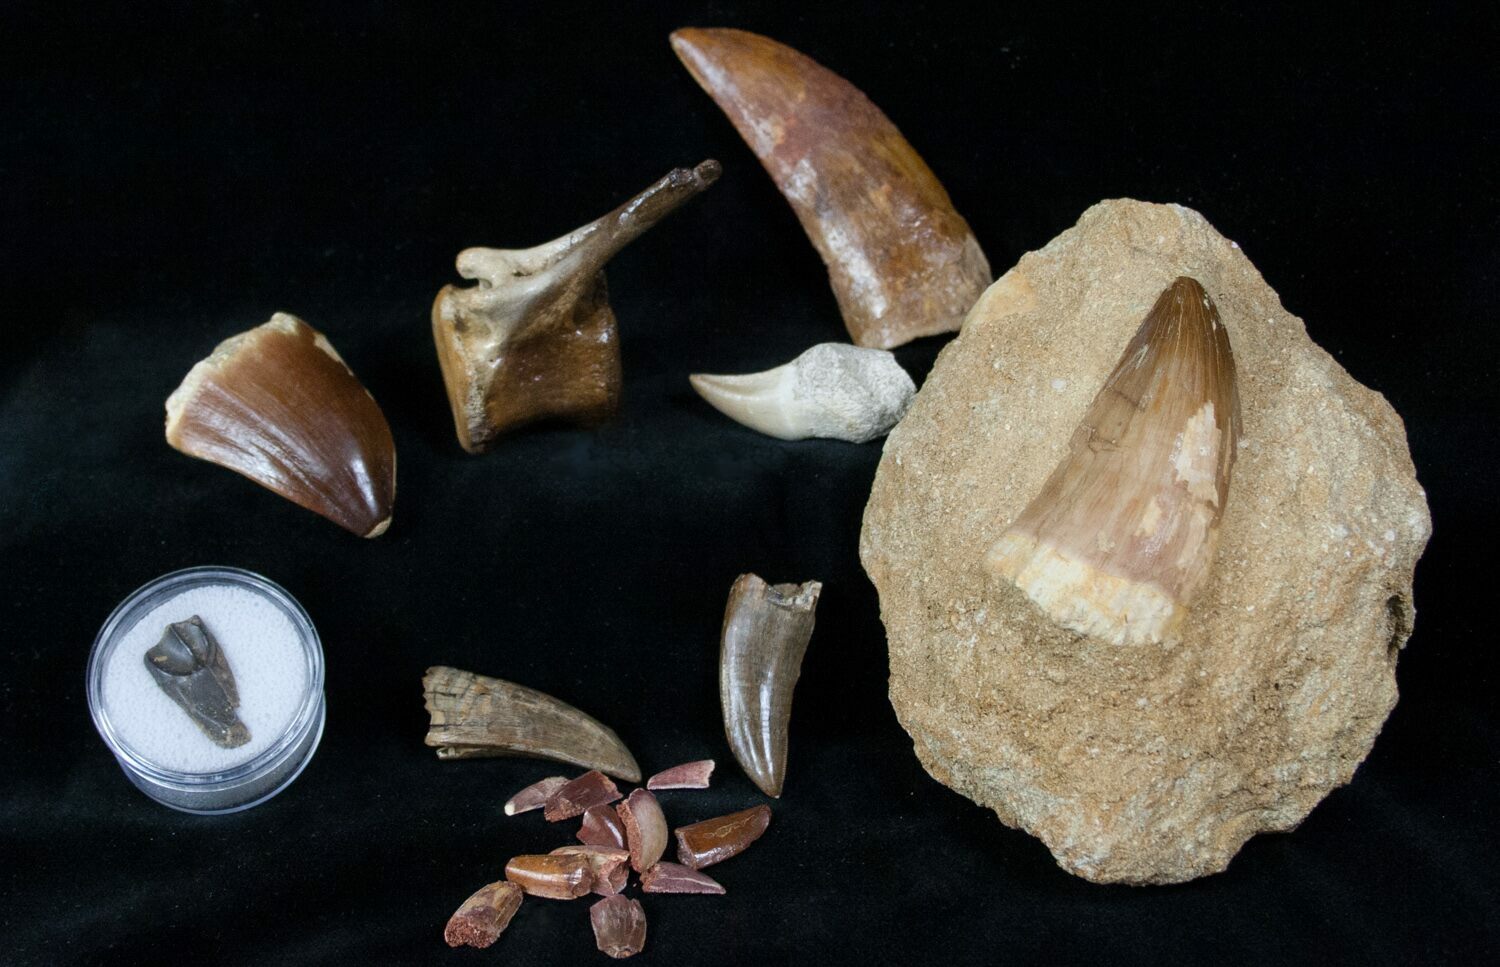 New Fossils of Jurassic World Page 